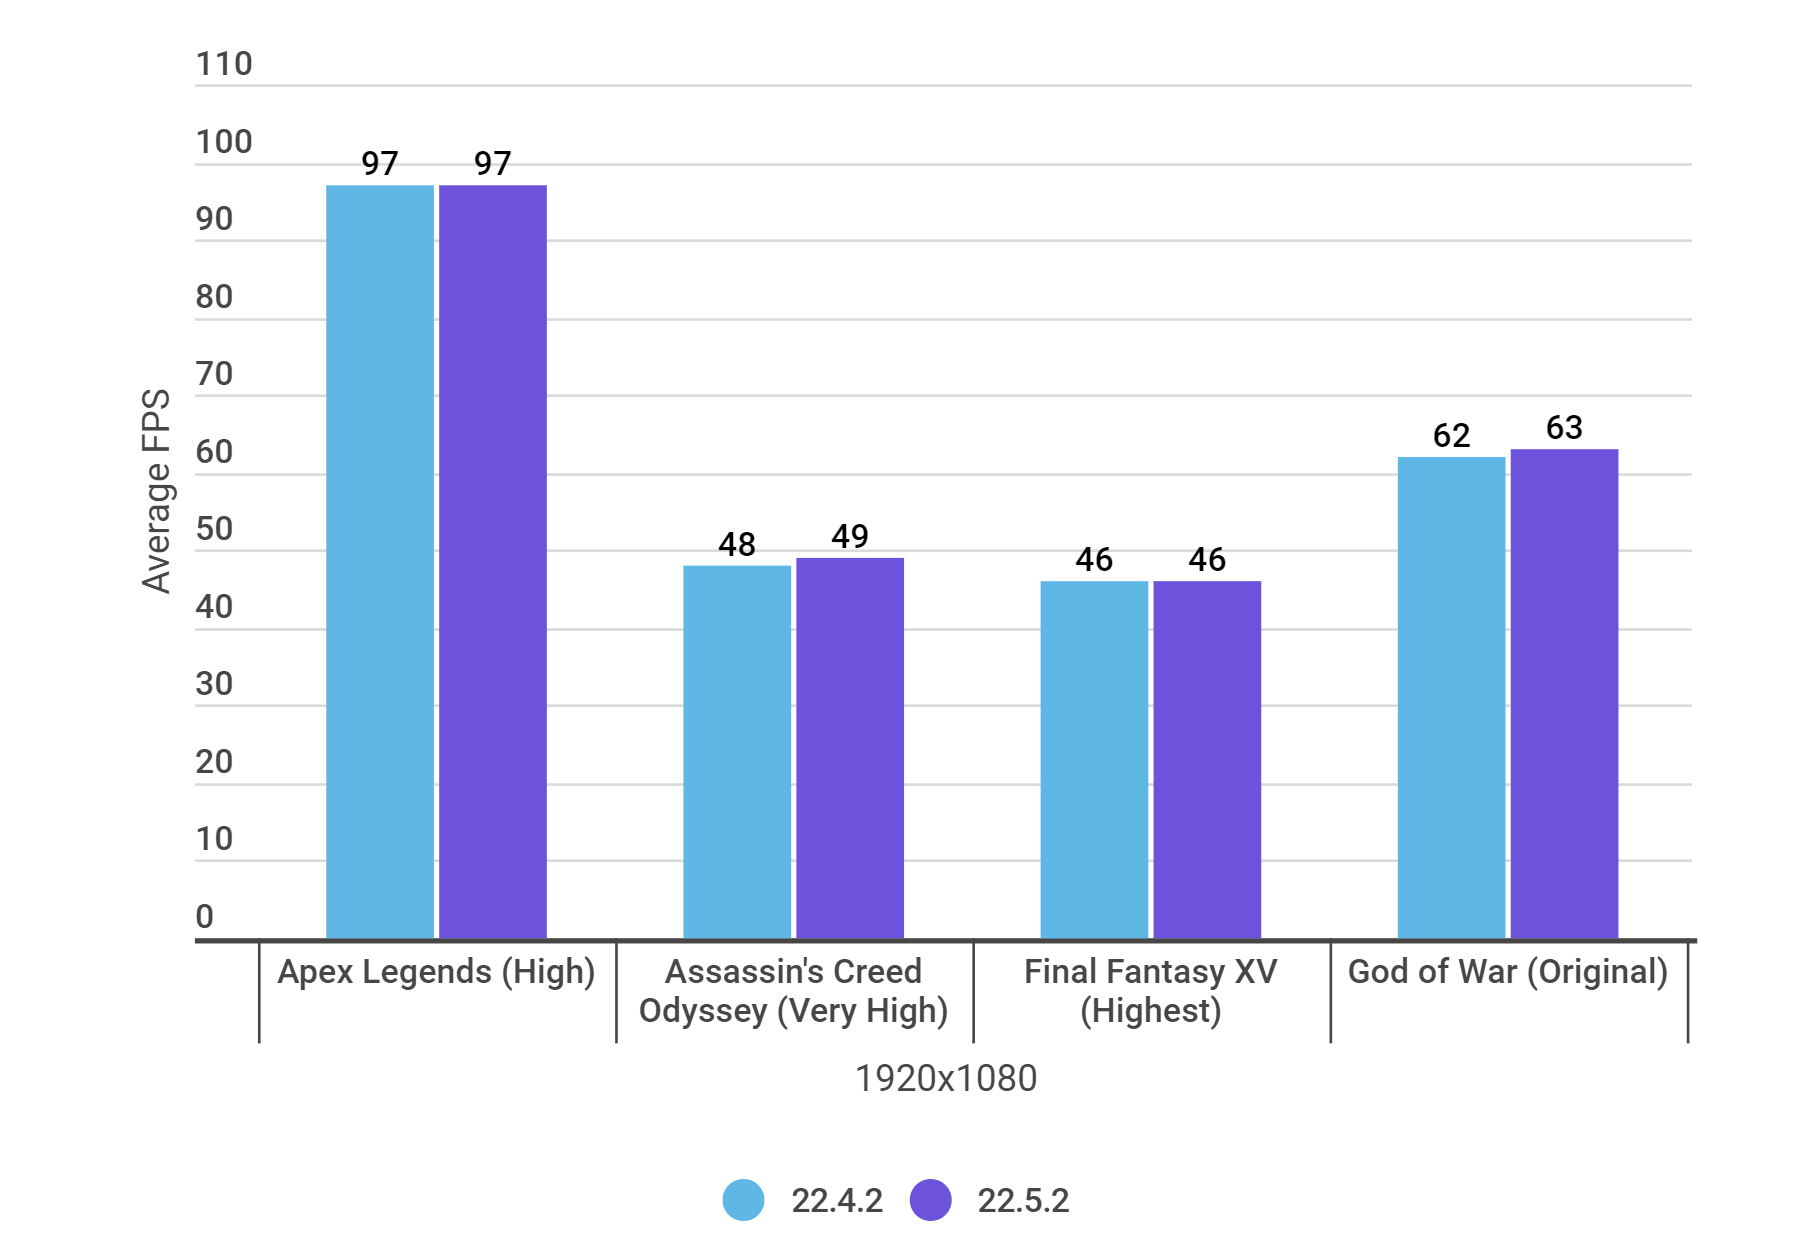 A bar chart showing the average FPS of various games running on both the AMD Radeon 22.4.2 and 22.5.2 graphics drivers.